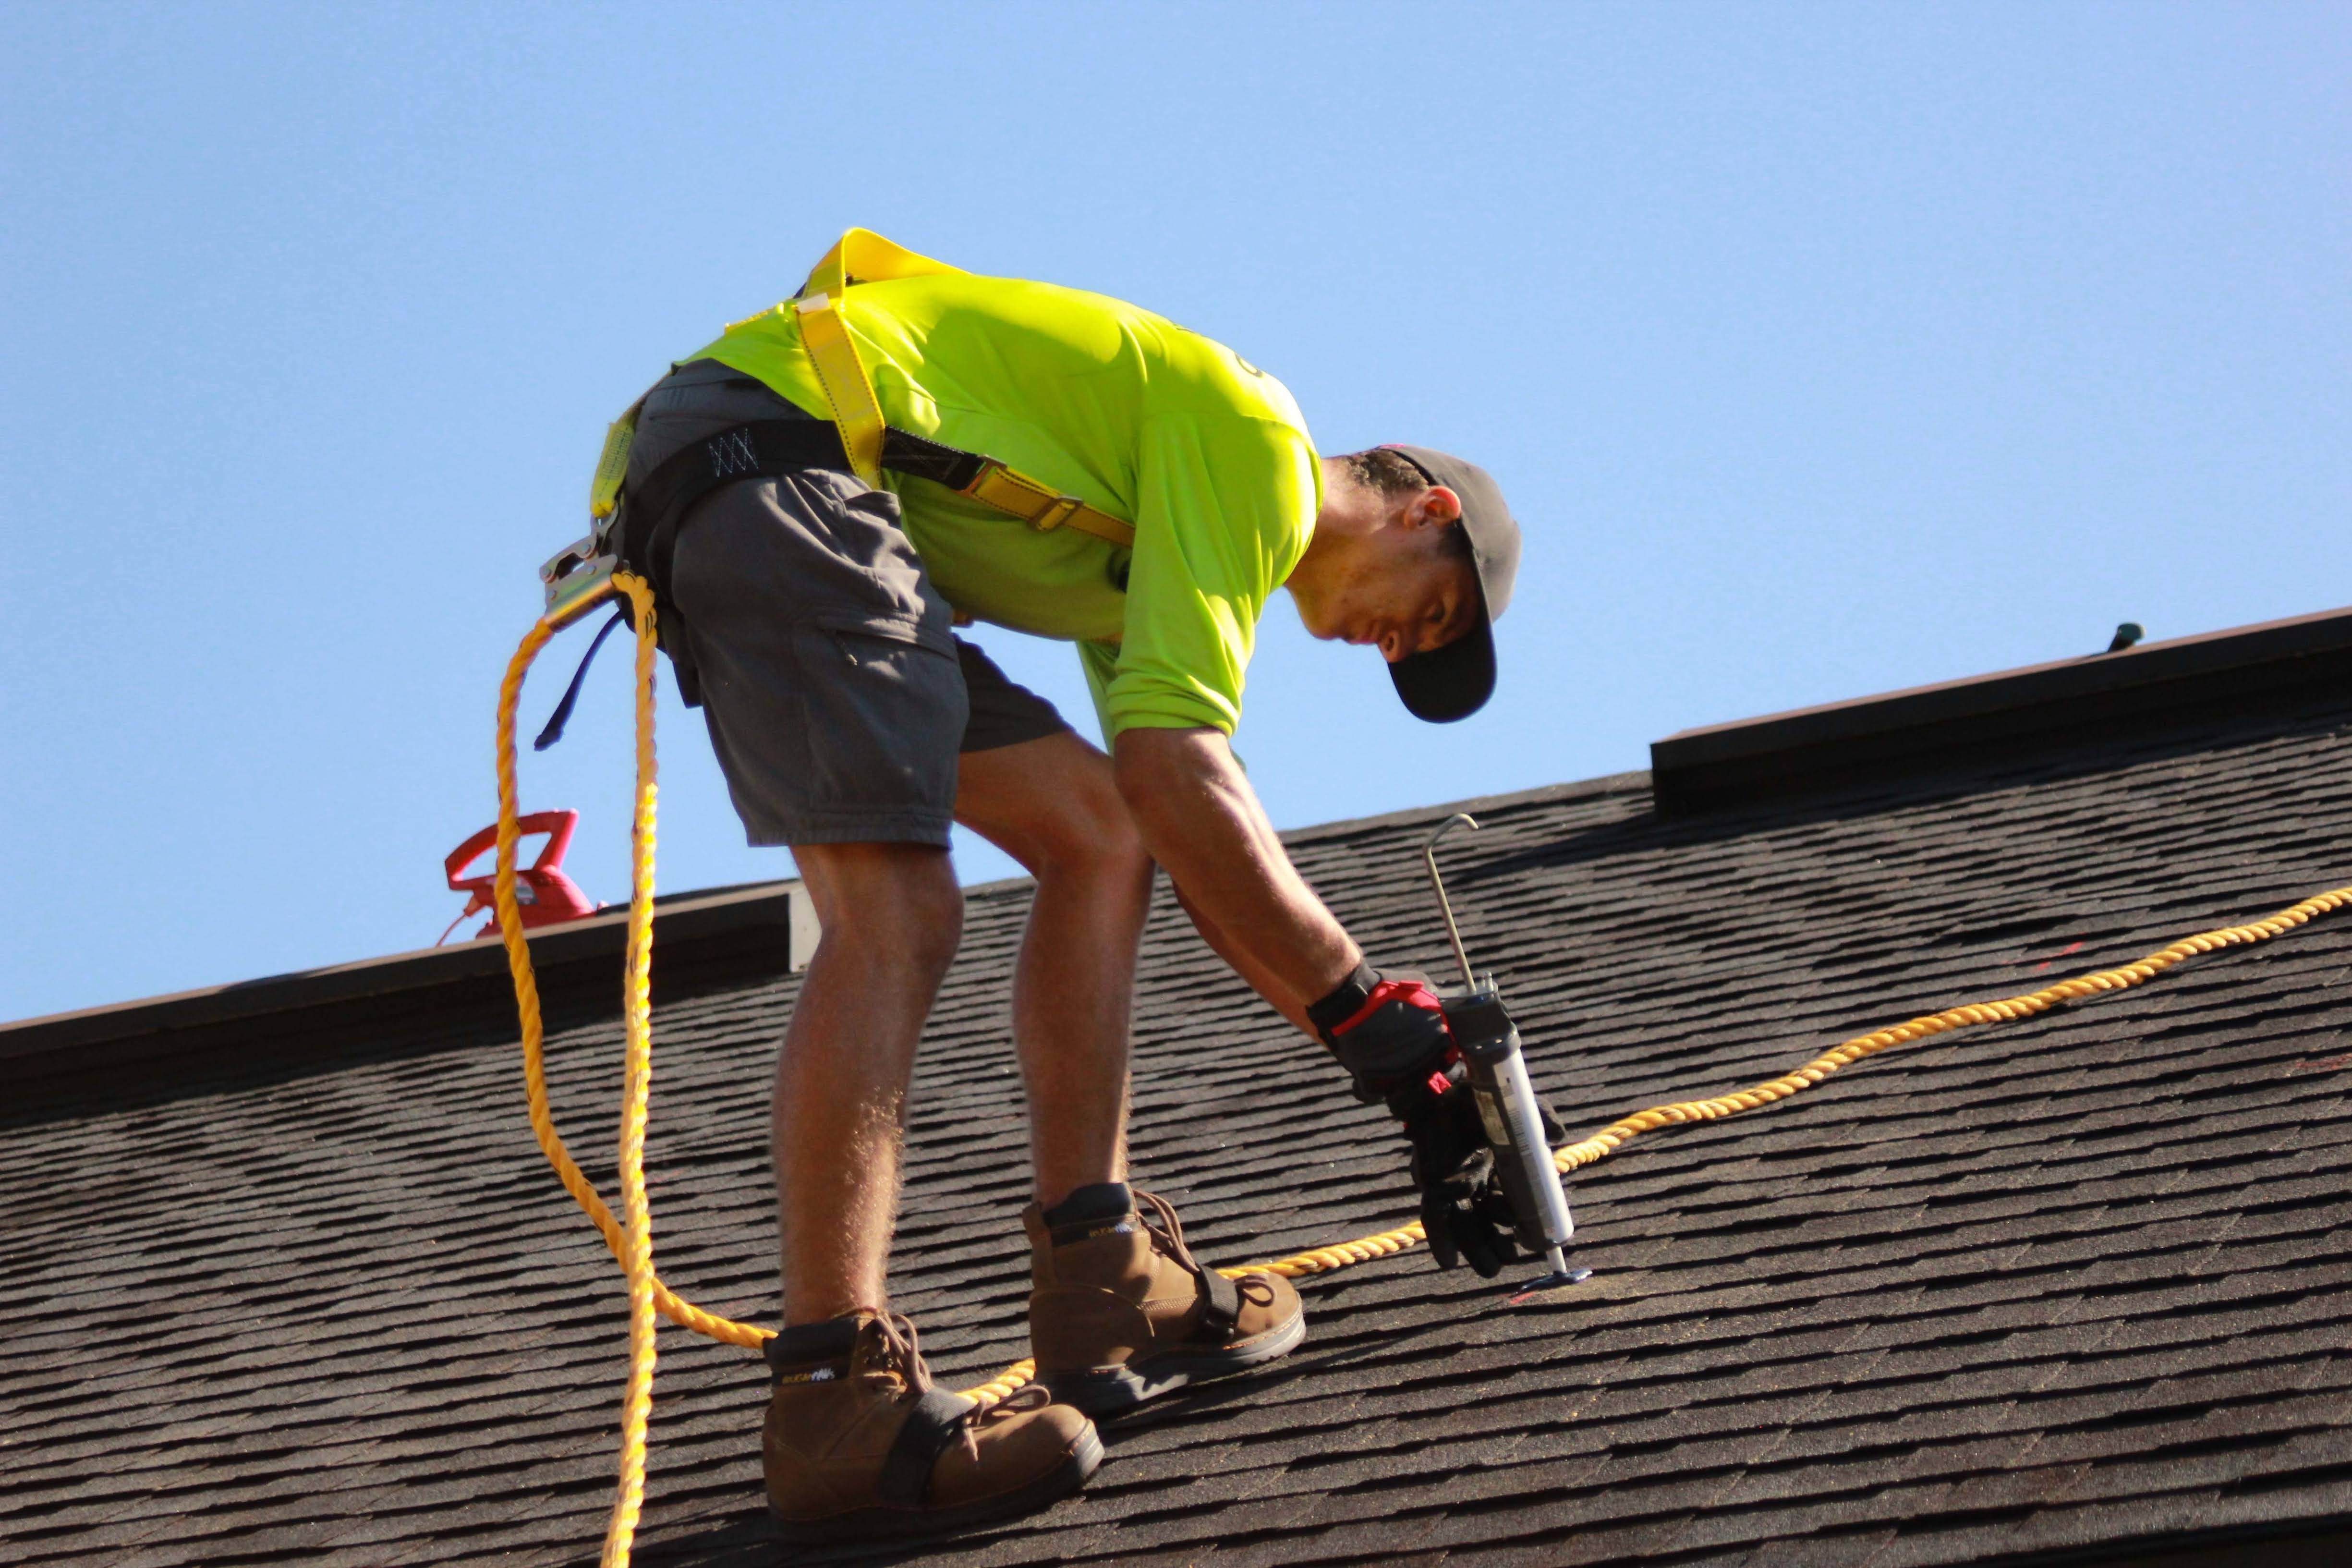 roofer wearing safety gear performing a repair